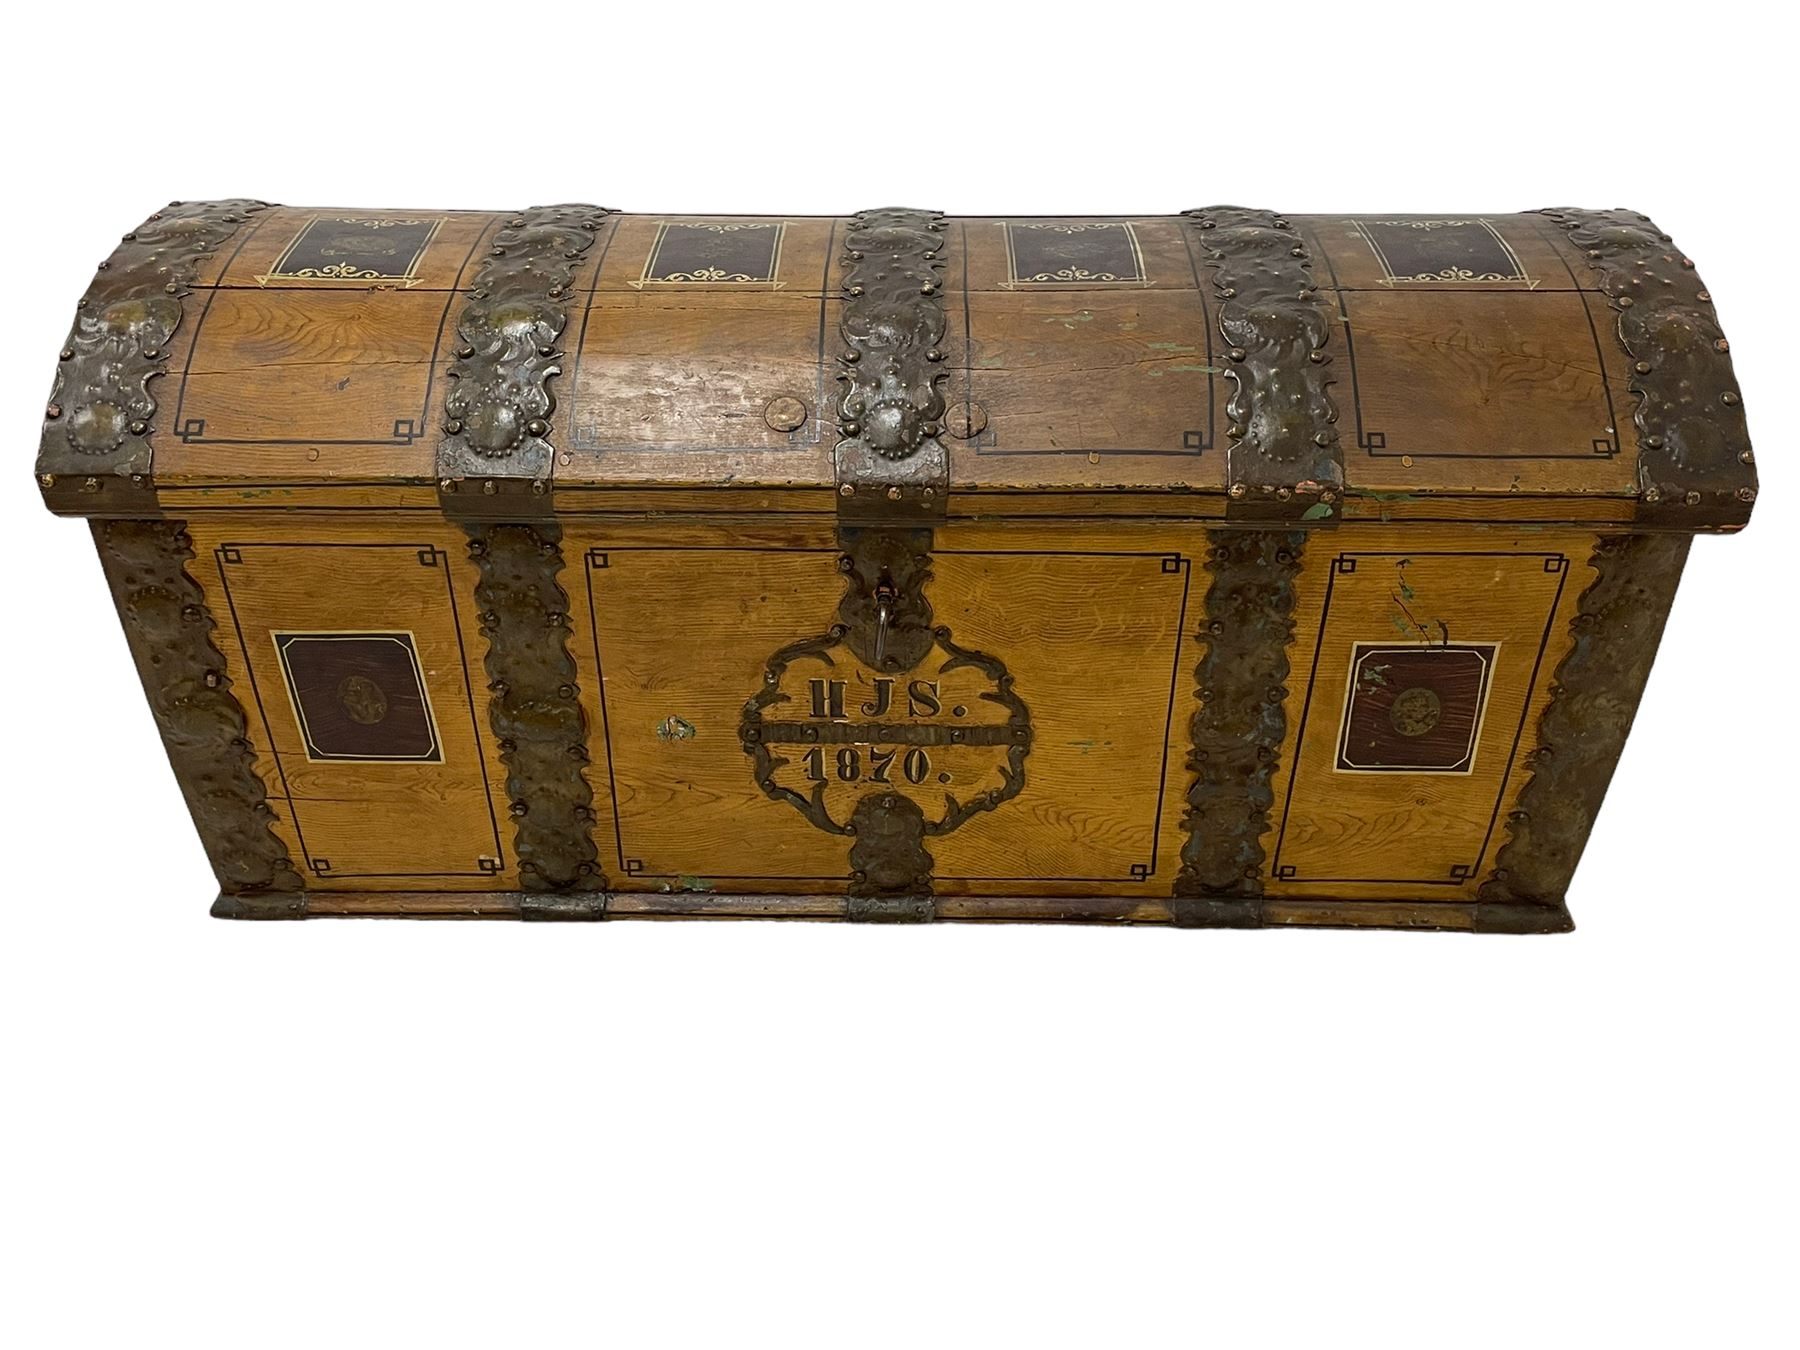 19th century Northern European painted oak sea chest - Image 13 of 29